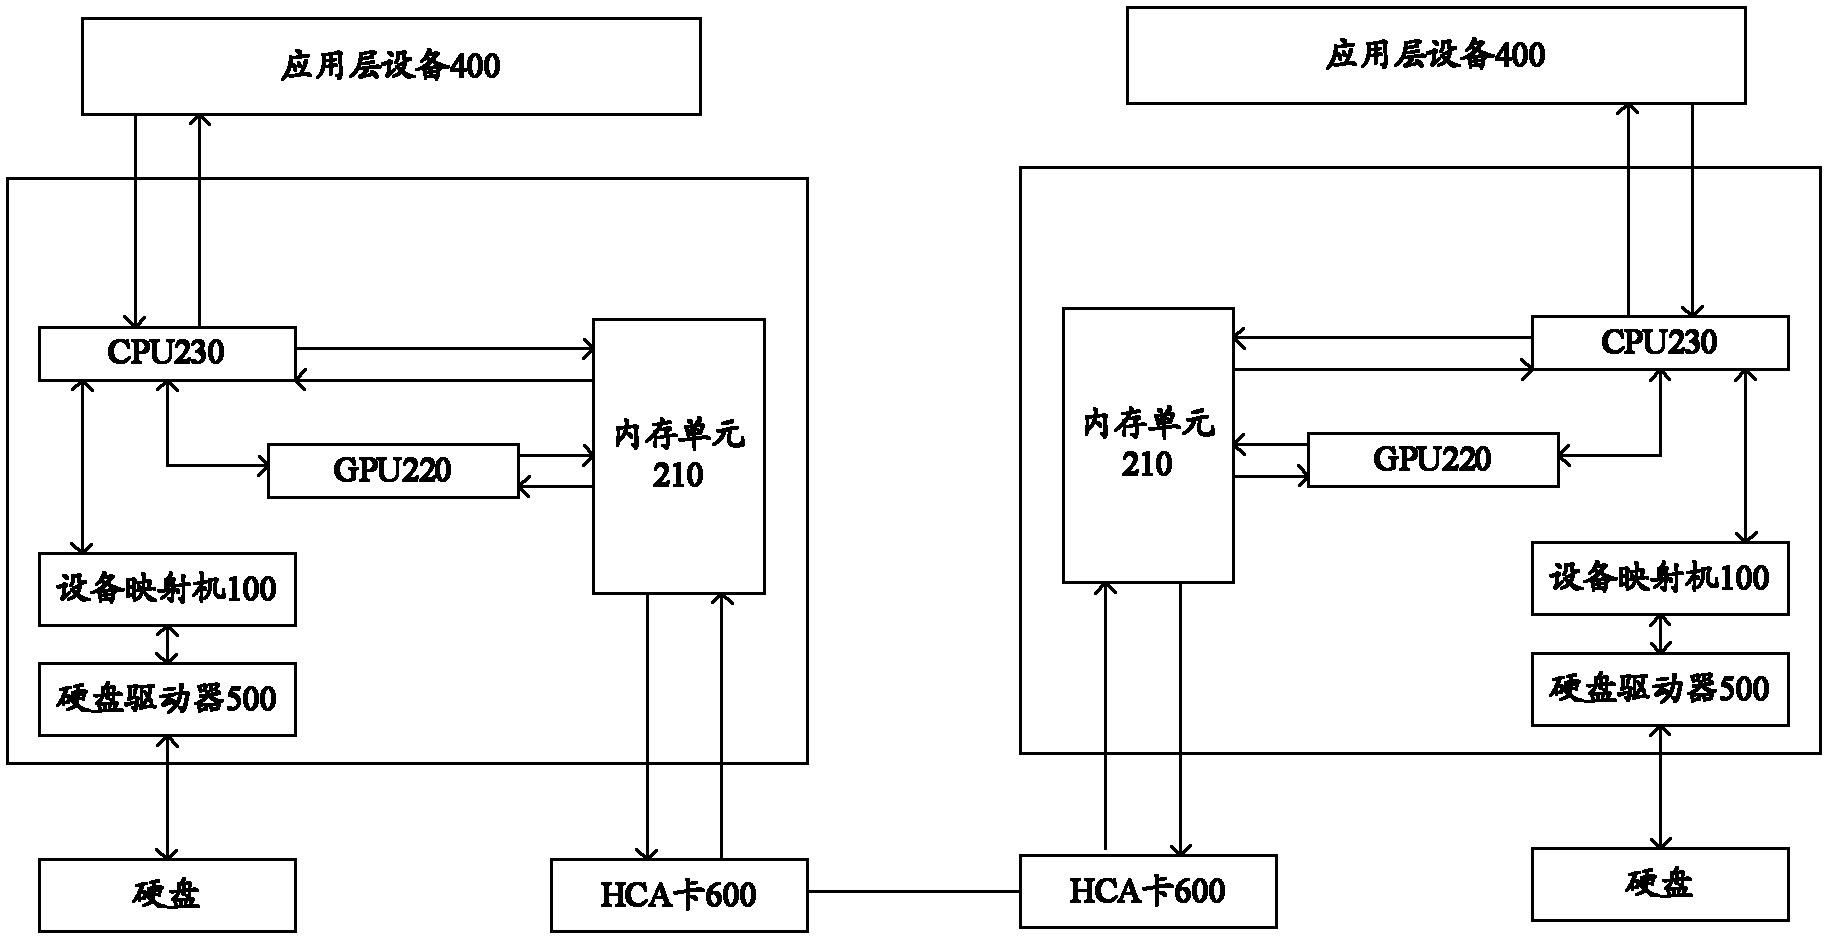 RS (Reed-Solomon) - DRAID( D redundant array of independent disk) system based on GPUs (graphic processing units) and method for controlling data of memory devices